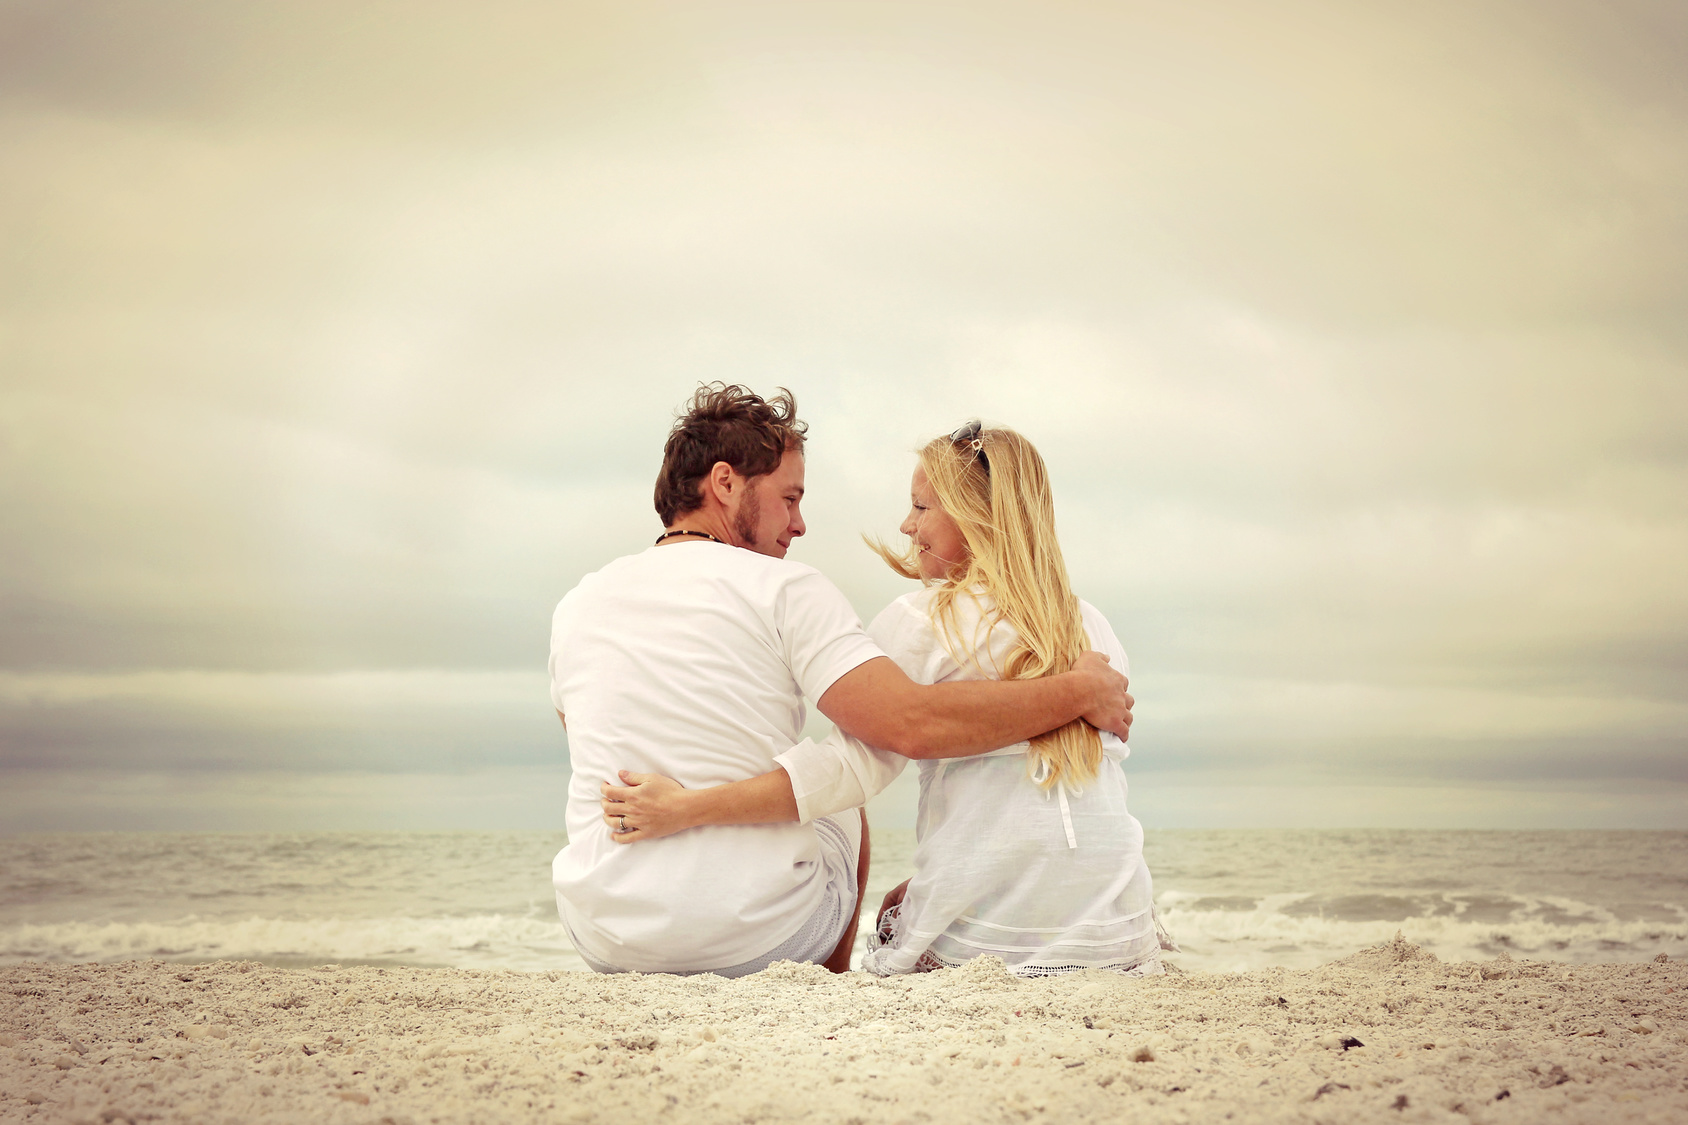 Happy Couple Sitting on Beach by Ocean in Vintage Color